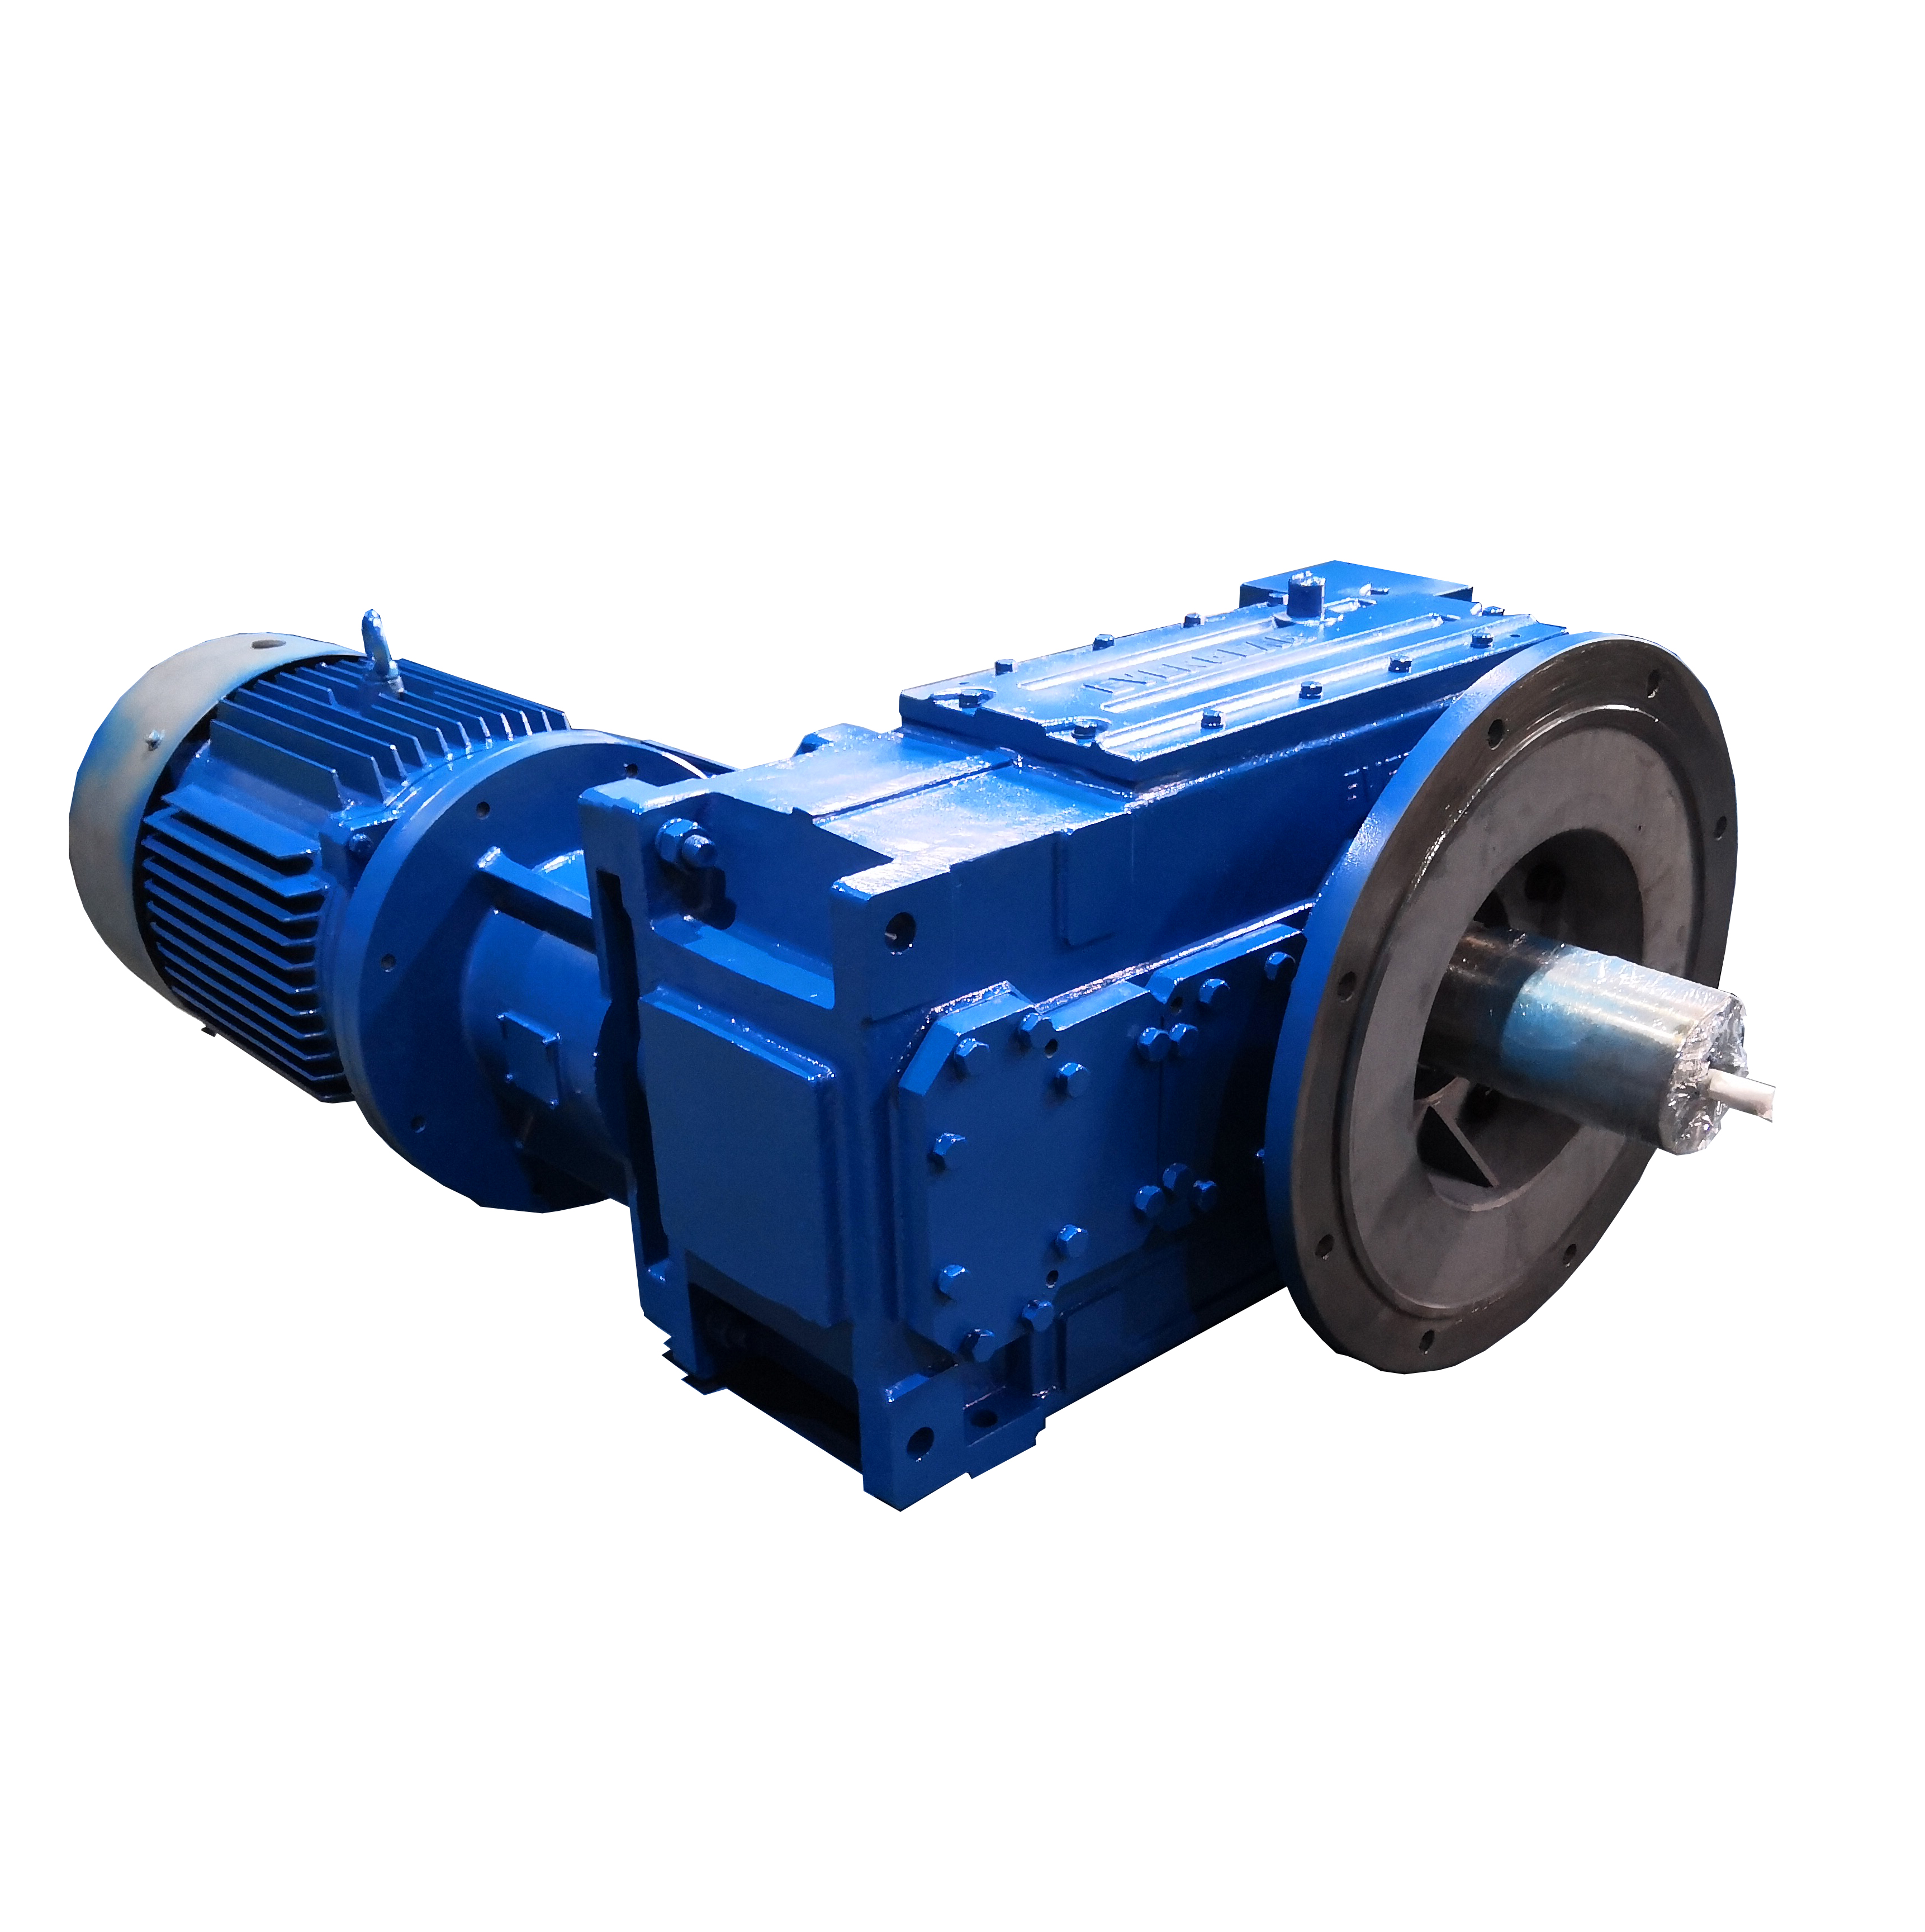 EVERGEAR H/B Series Parallel Shaft helical bevel gear box for vertical slurry pump/centrifugal